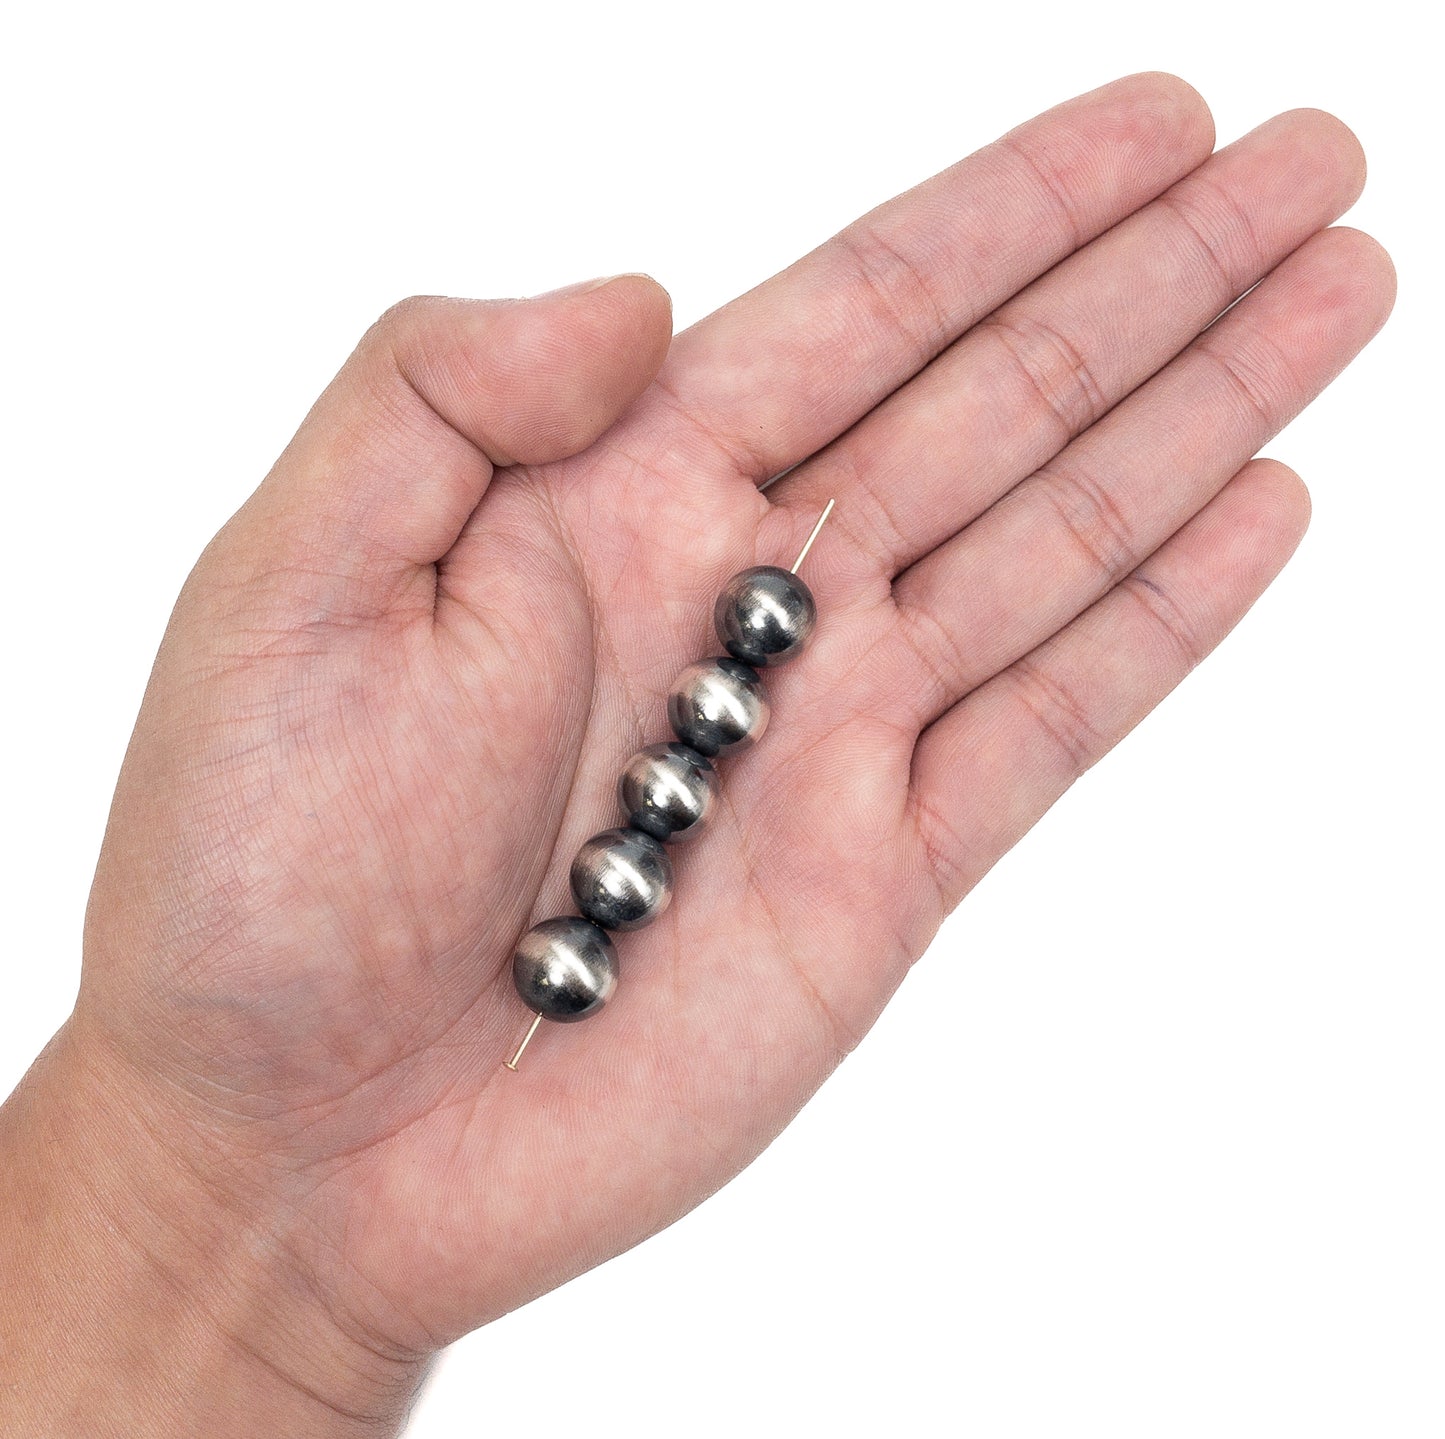 12mm Navajo Smooth Round Bead (Oxidized Sterling Silver) - 1 pc.